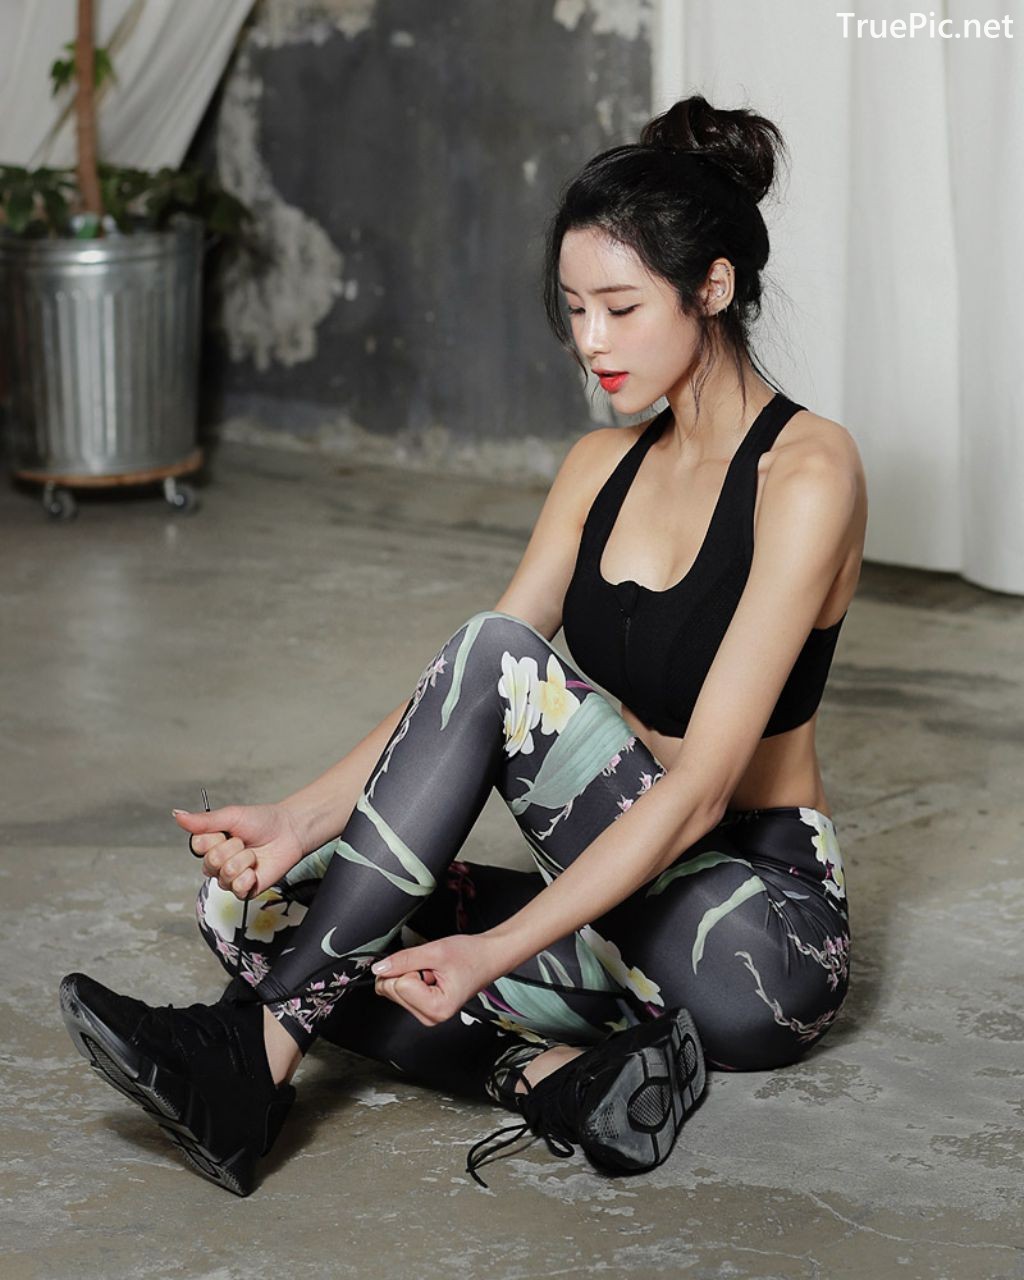 Image-Korean-Fashion-Model-Ju-Woo-Fitness-Set-Collection-TruePic.net- Picture-102